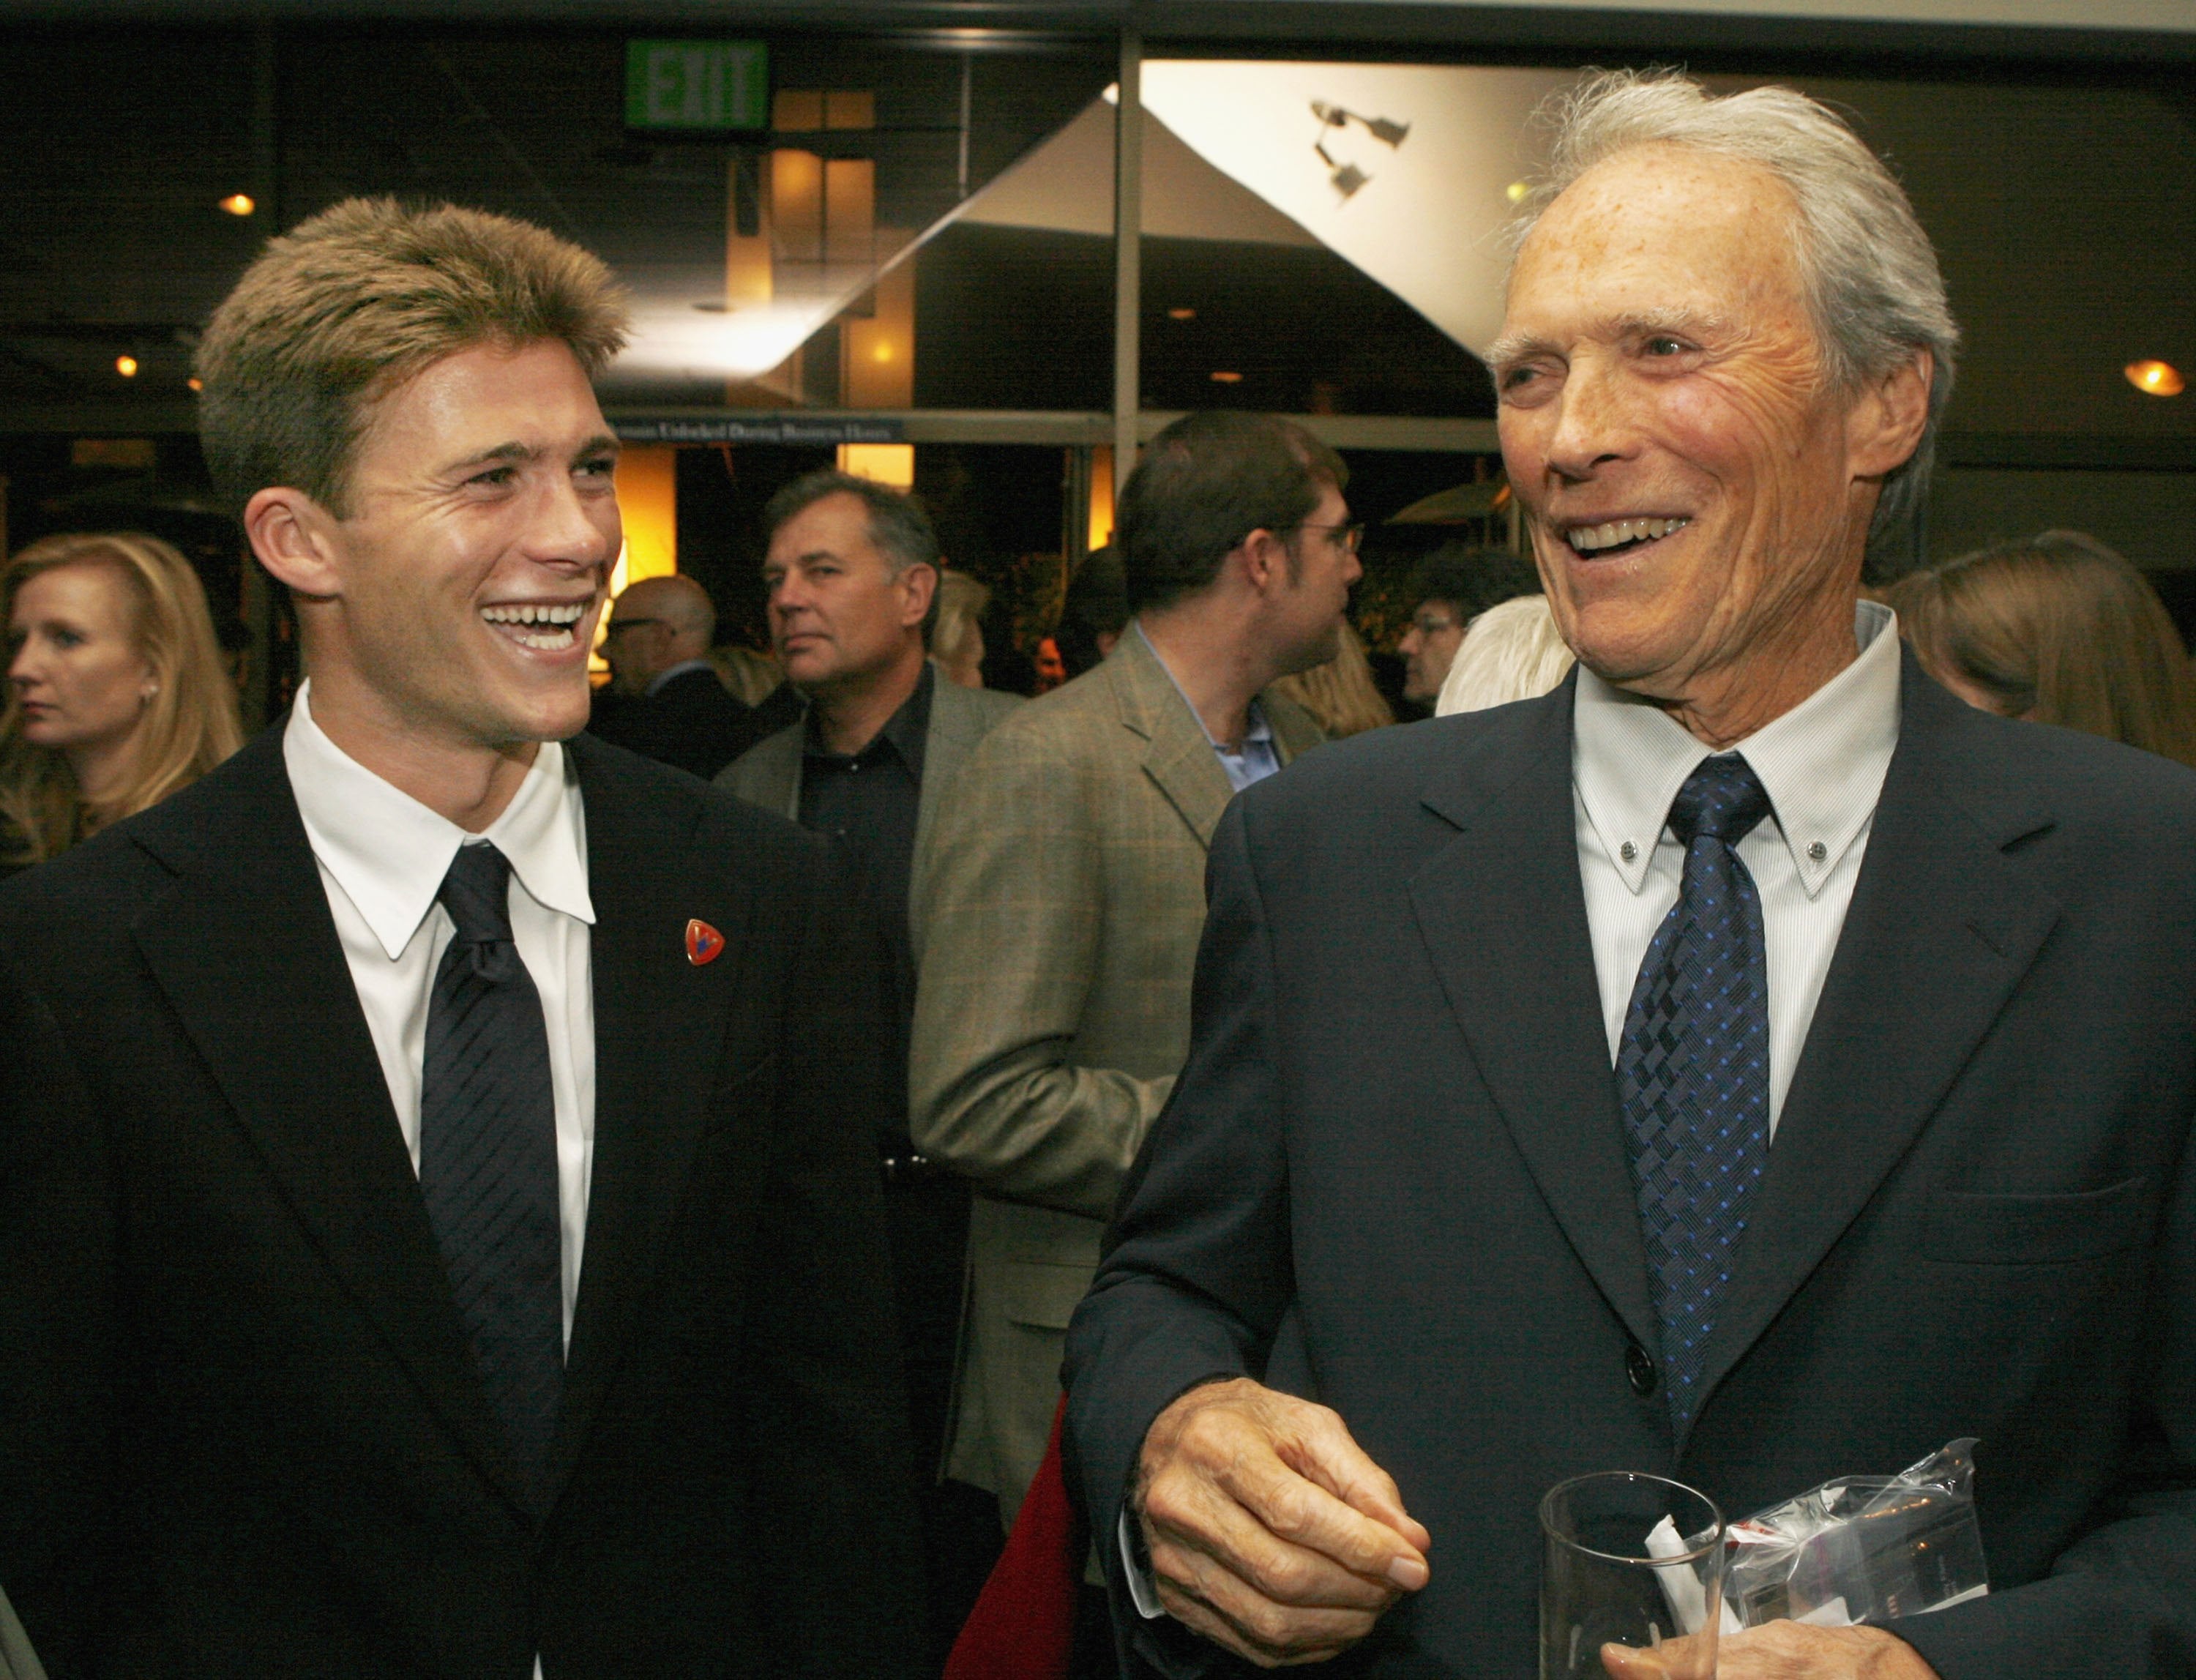 Scott and Clint Eastwood at the ‘Flags Of Our Fathers’ premiere